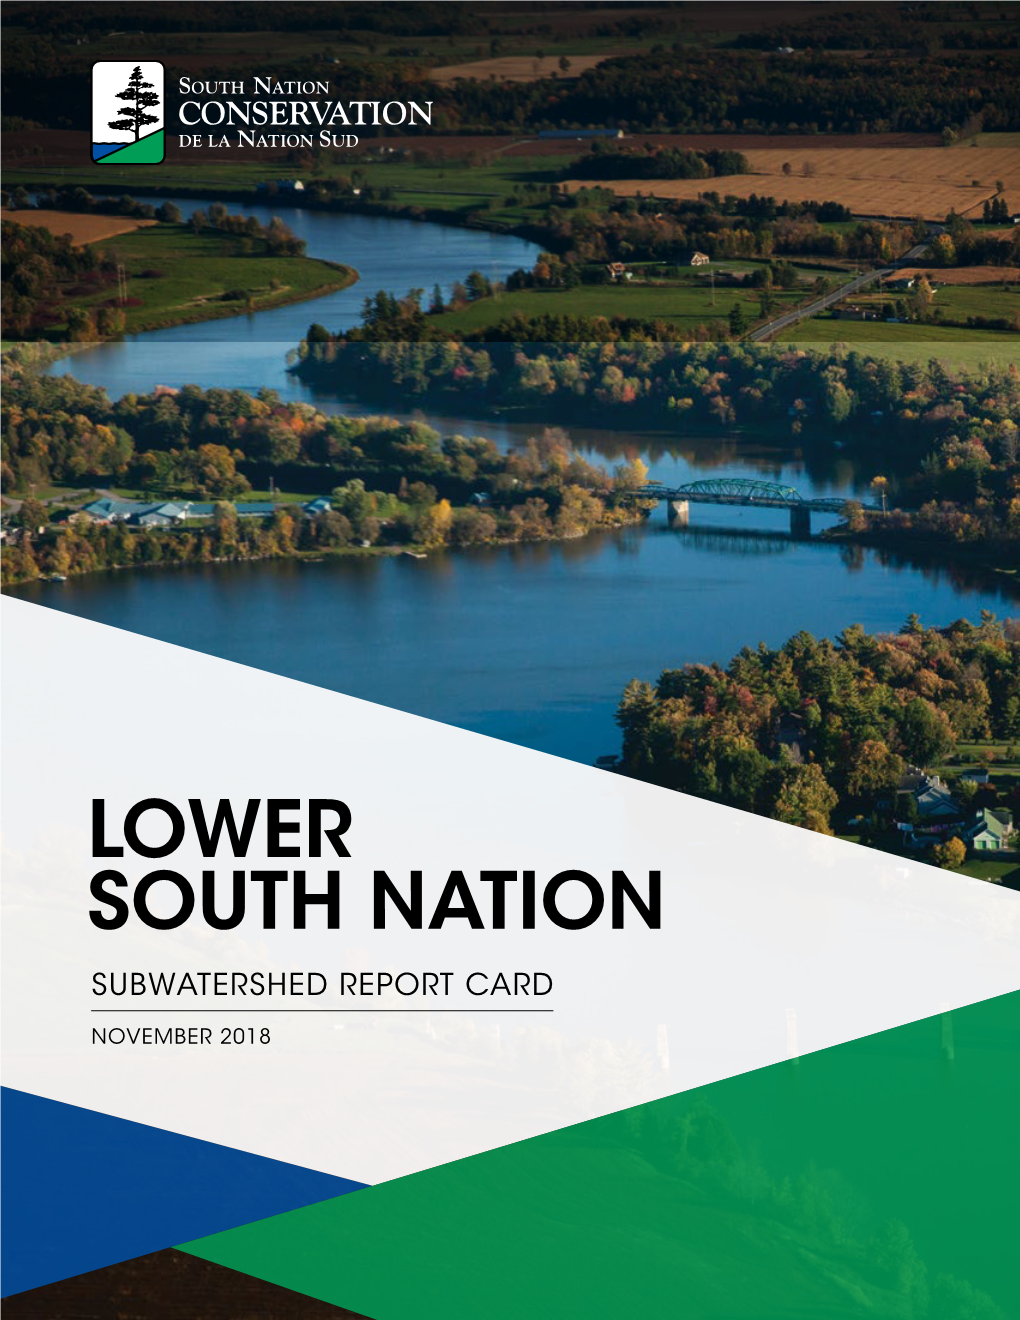 Lower South Nation Subwatershed Report Card